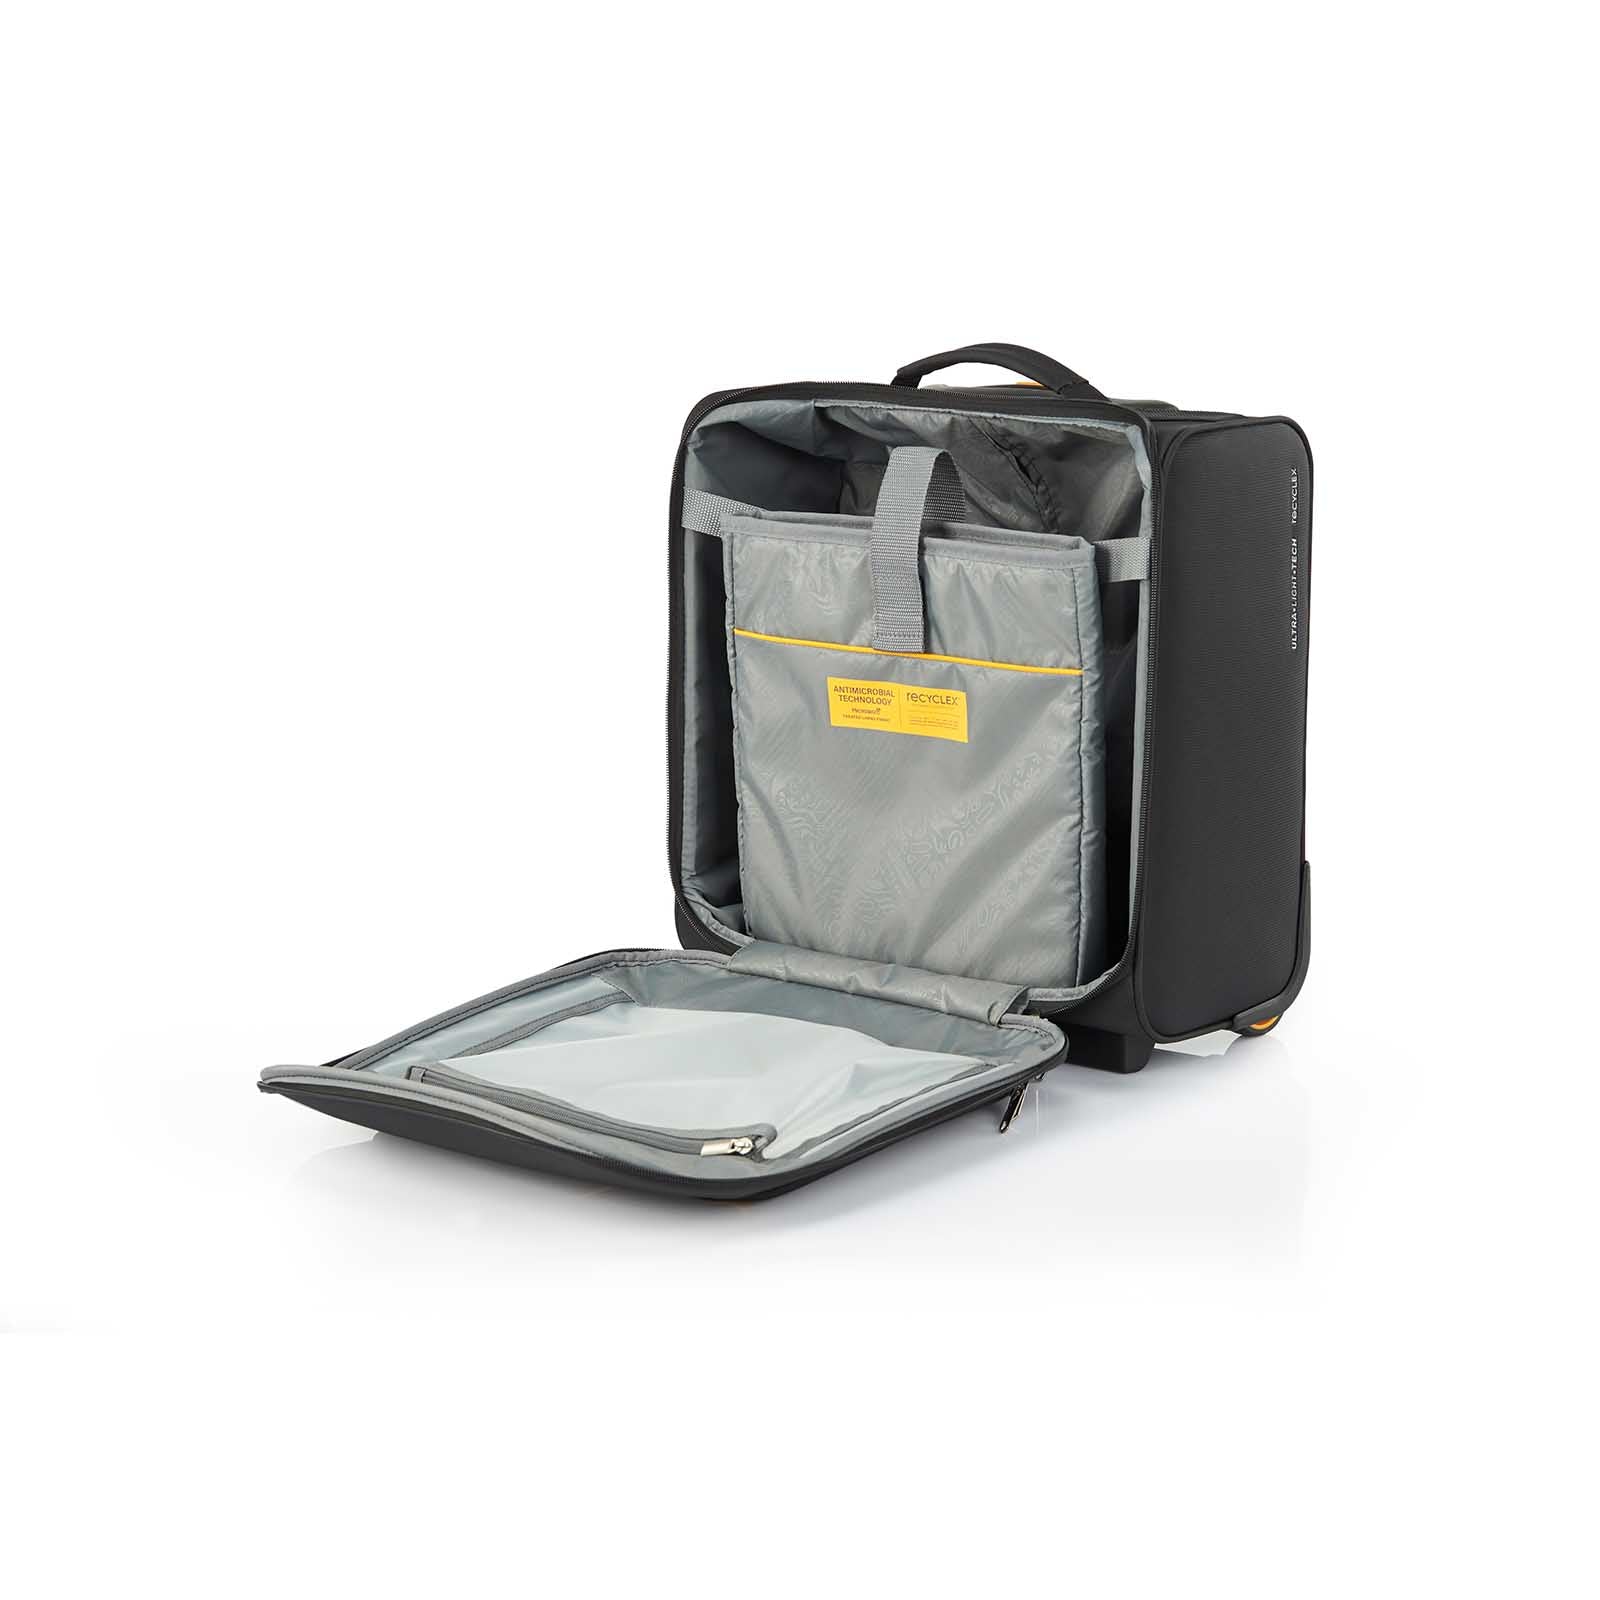 American-Tourister-Applite-4-Eco-Underseater-Suitcase-Black-Mustard-Laptop-Pouch